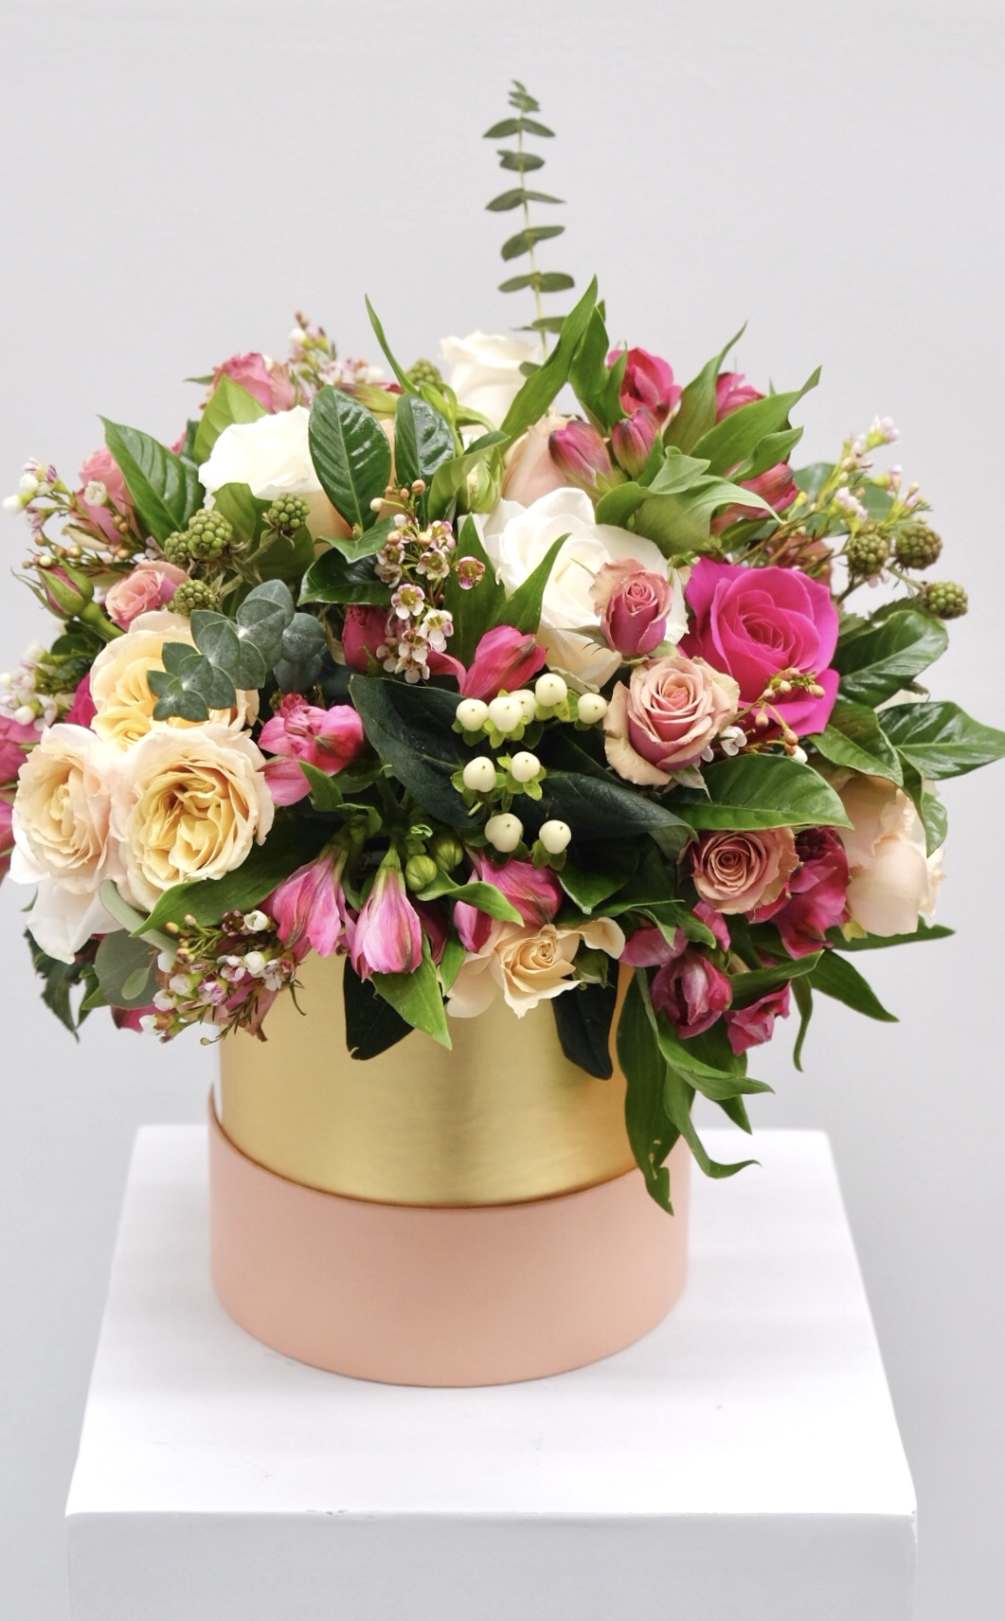 Gals just want to have fun with this garden style arrangement of